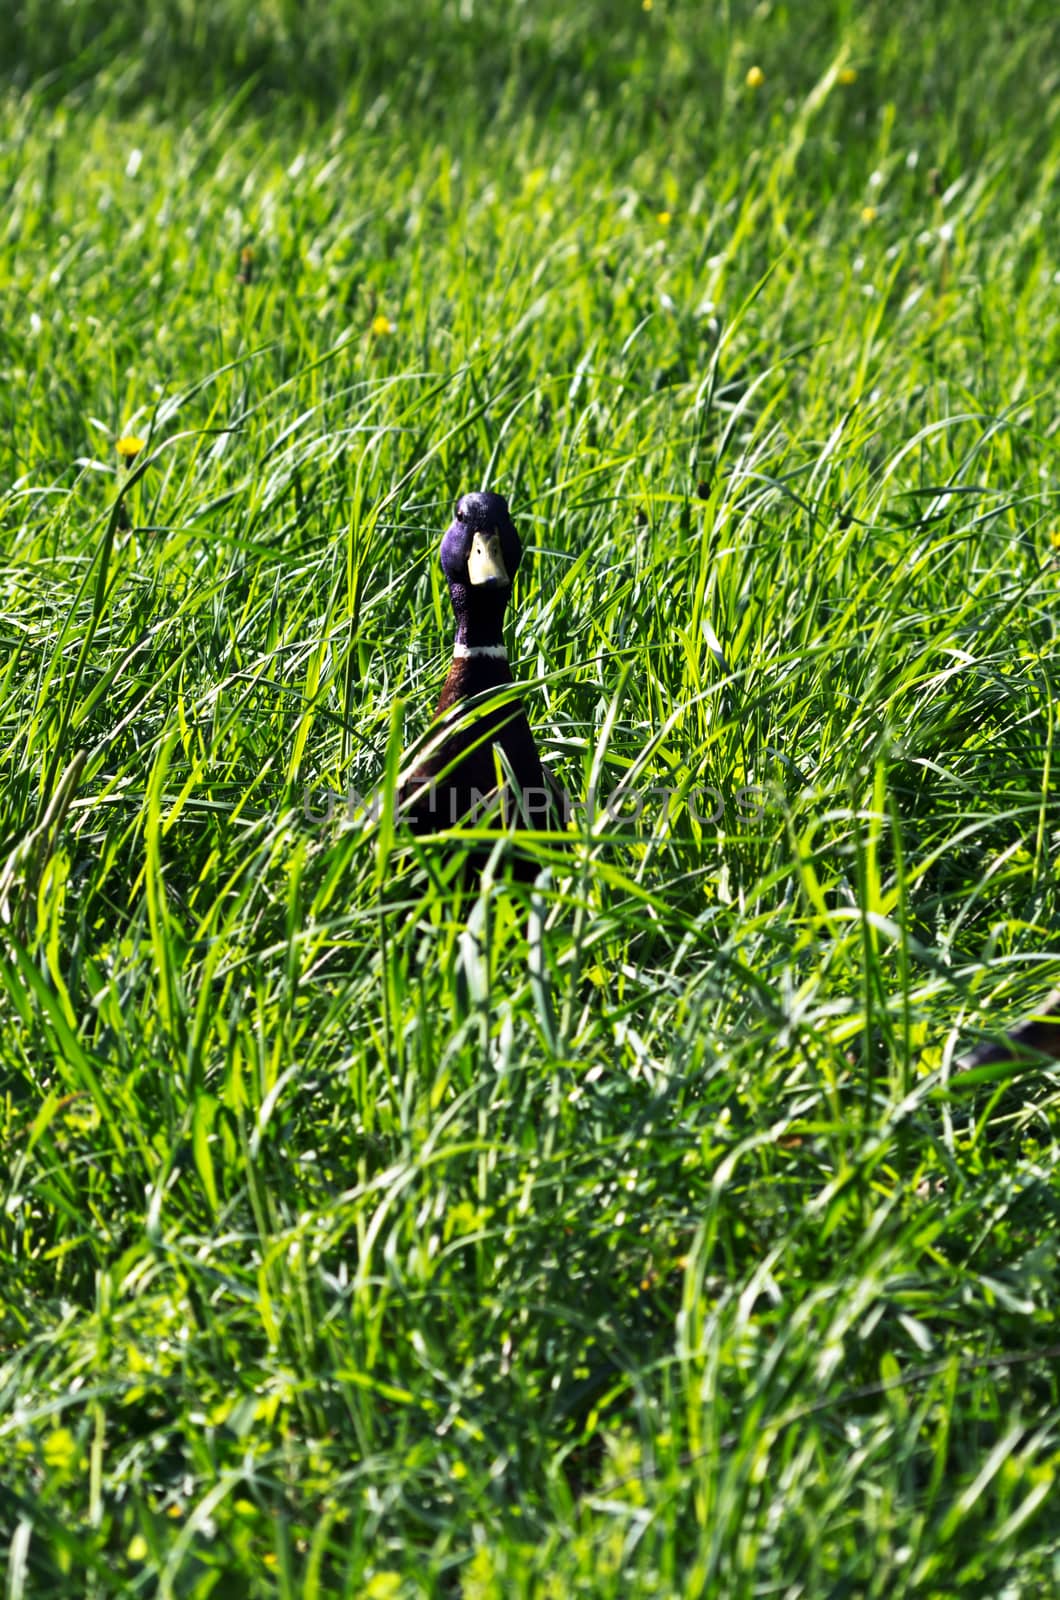 Male and female ducks walking on a grass in a park